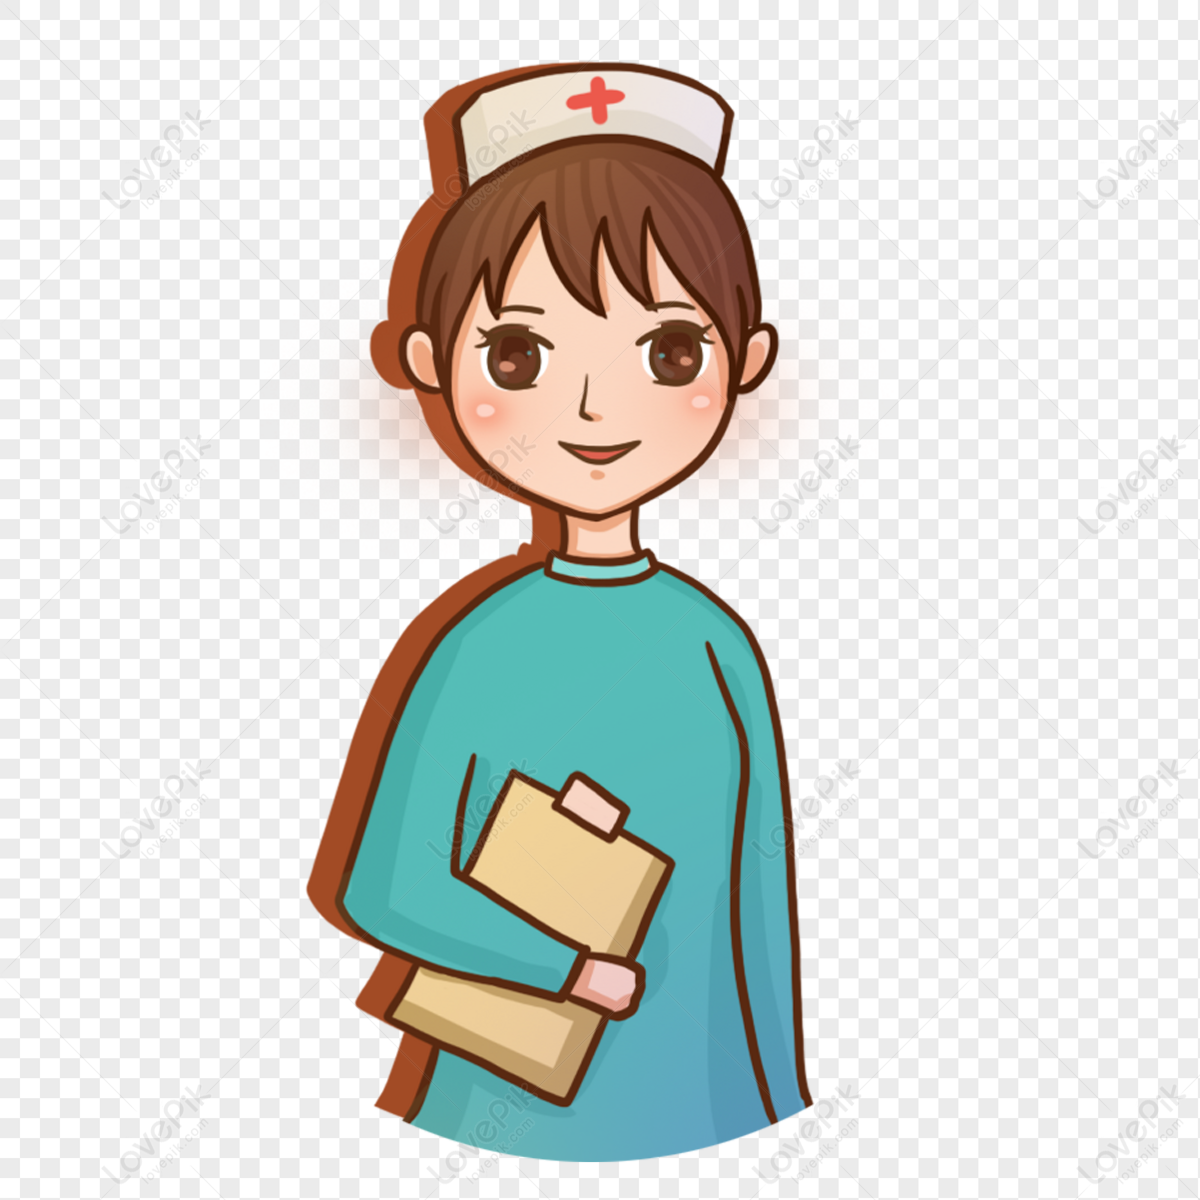 Hand Painted Nurse PNG Transparent And Clipart Image For Free Download -  Lovepik | 400495776